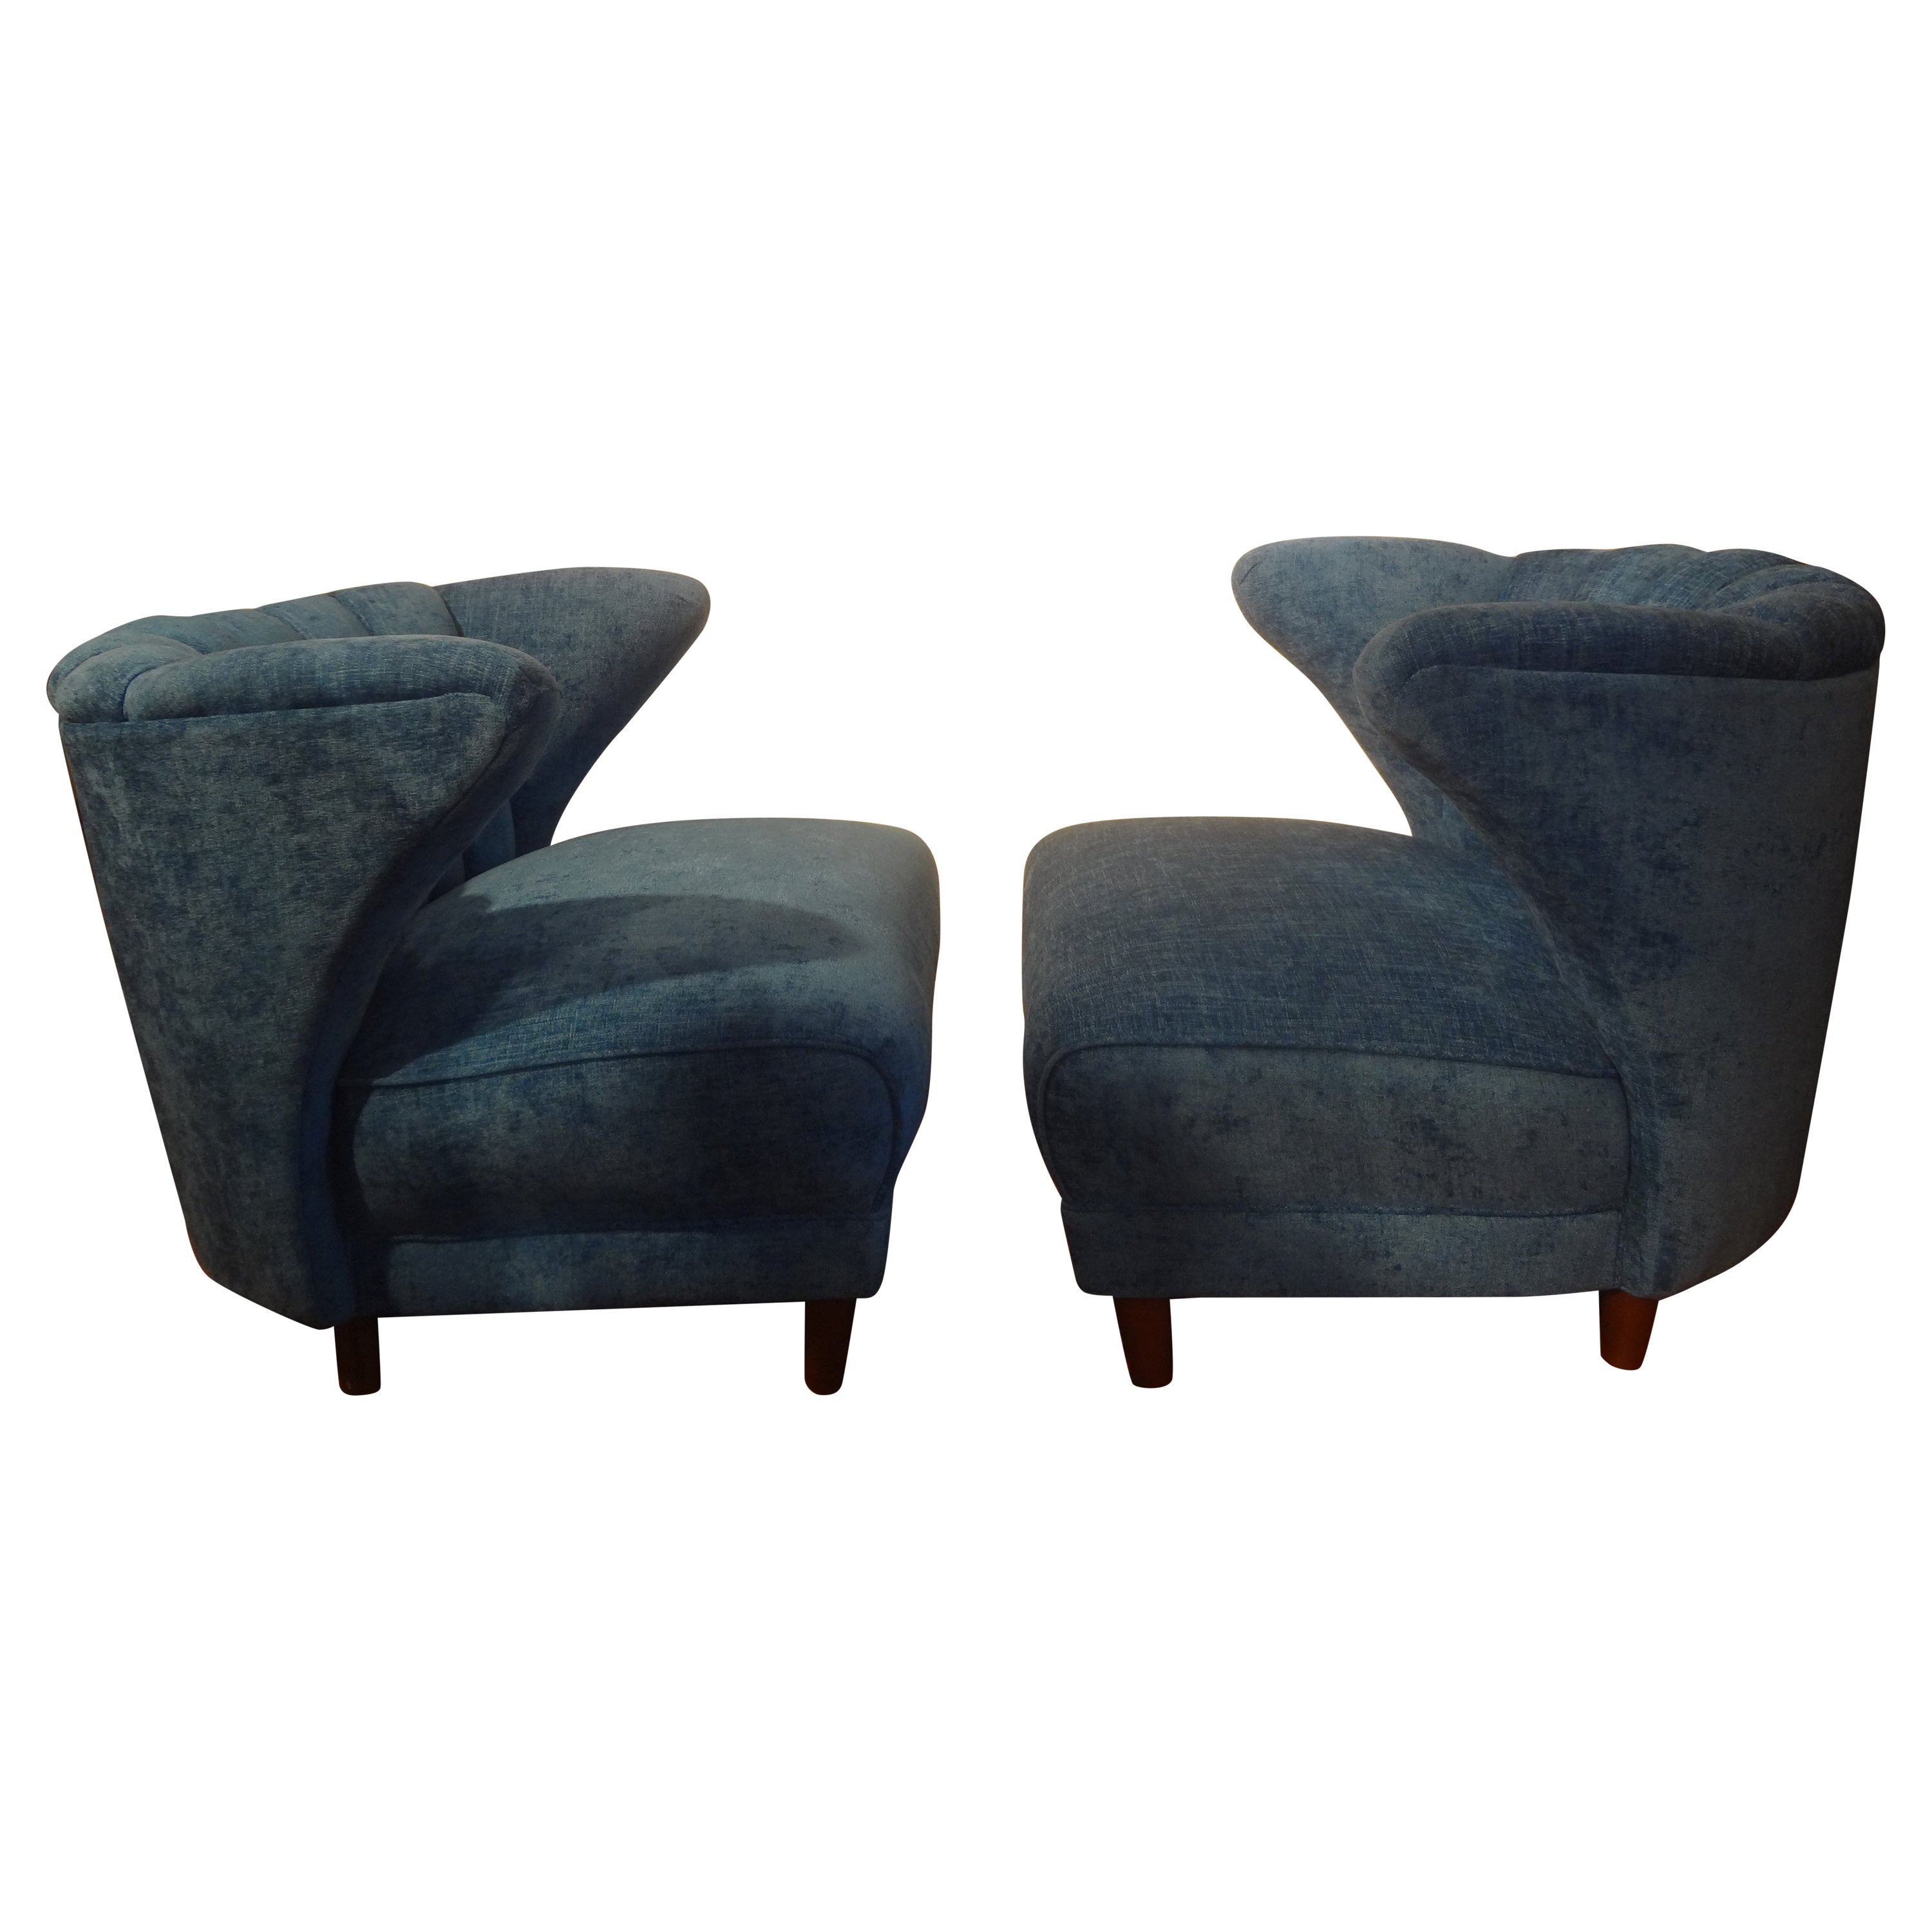 Pair Of Mid Century Modern Lounge Chairs By Karpen Of California For Sale